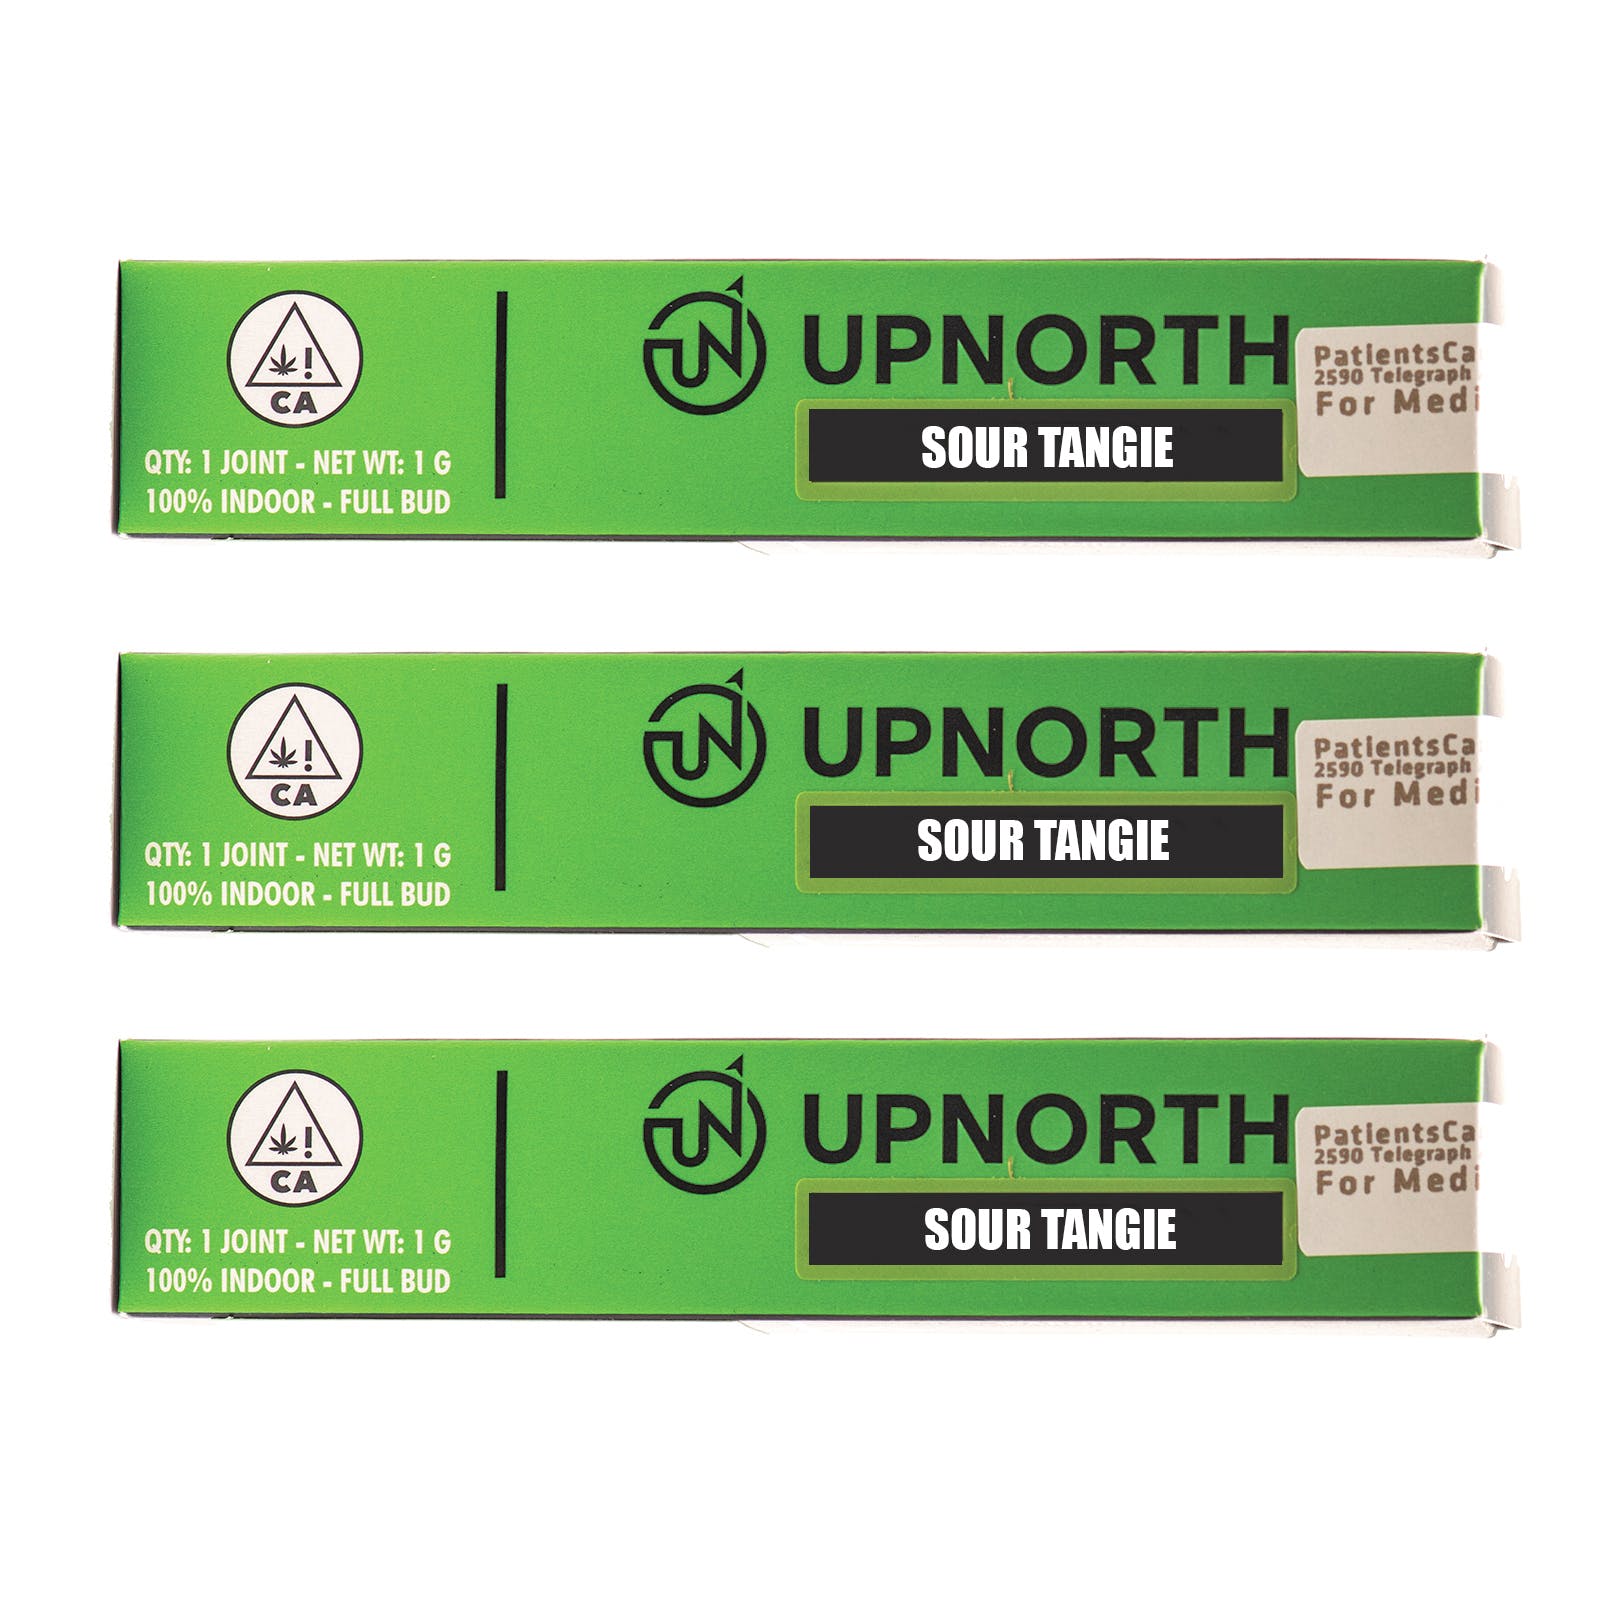 *Medical/Online(21+)* UPNORTH Pre-Roll - Sour Tangie